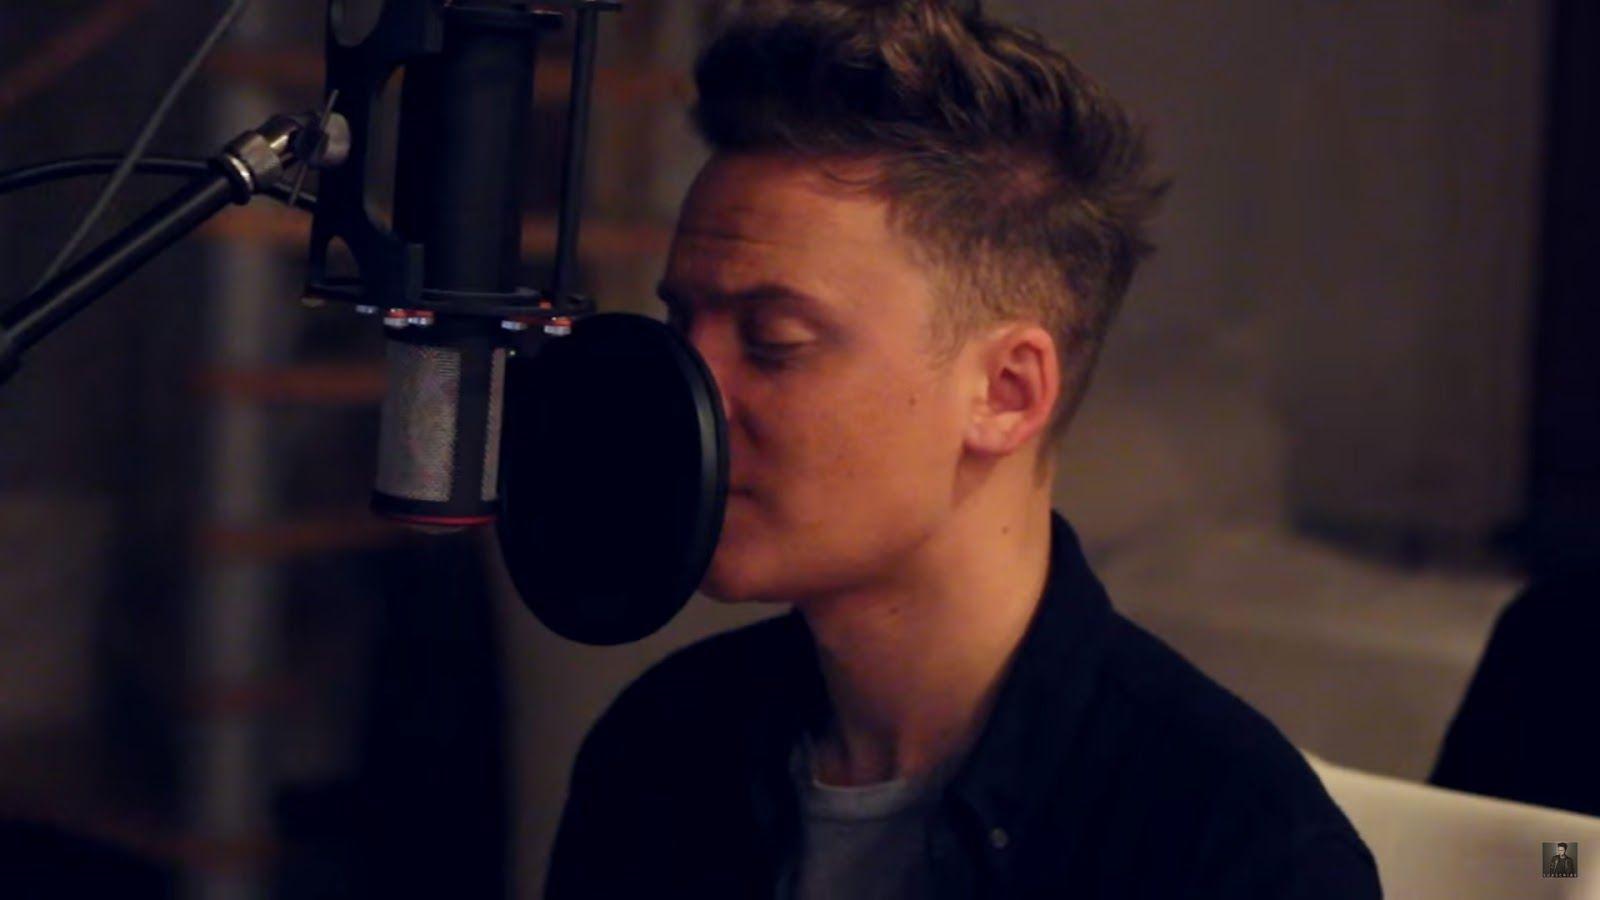 Conor Maynard Yourself ft Anth Justin Bieber #Acoustic